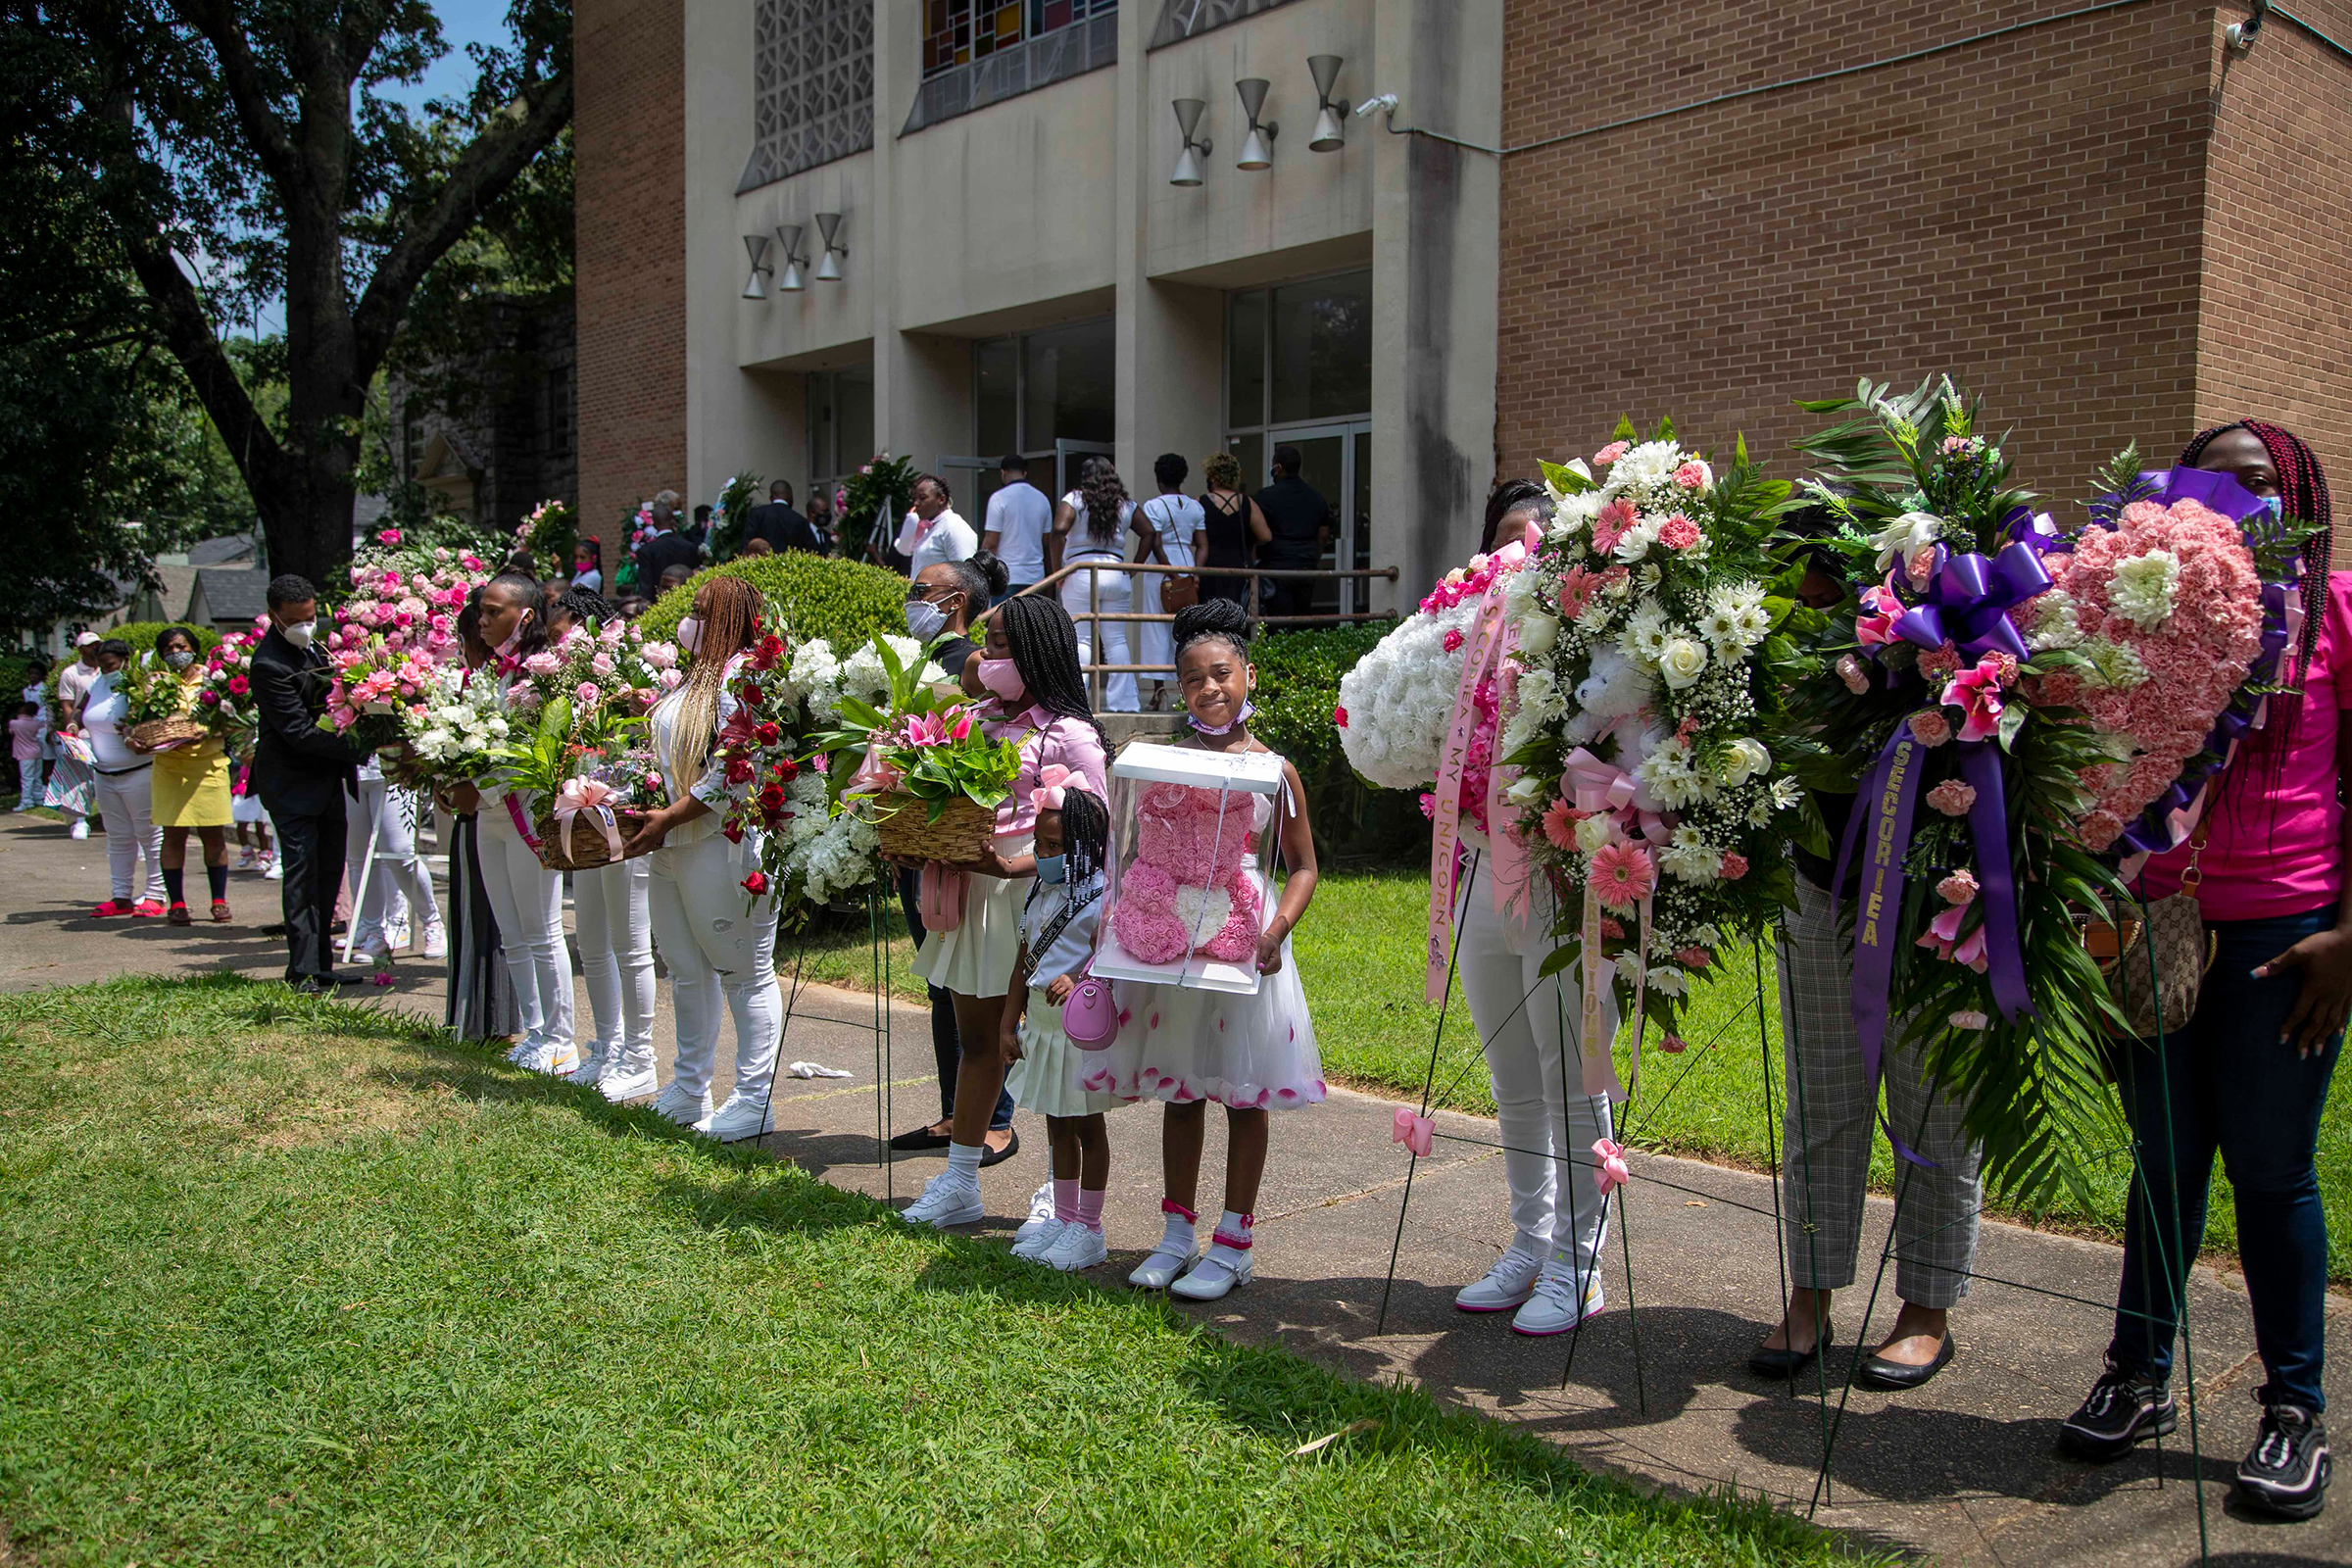 Family and friends of Secoriea Turner, an eight-year-old who was fatally shot while in a car with her mother near the site where Rayshard Brooks was killed by a police officer weeks earlier, leading to protests against police brutality, present floral arrangements during her home-going service at New Calvary Missionary Baptist Church in Atlanta on July 15. (Alyssa Pointer—Atlanta Journal-Constitution/AP)